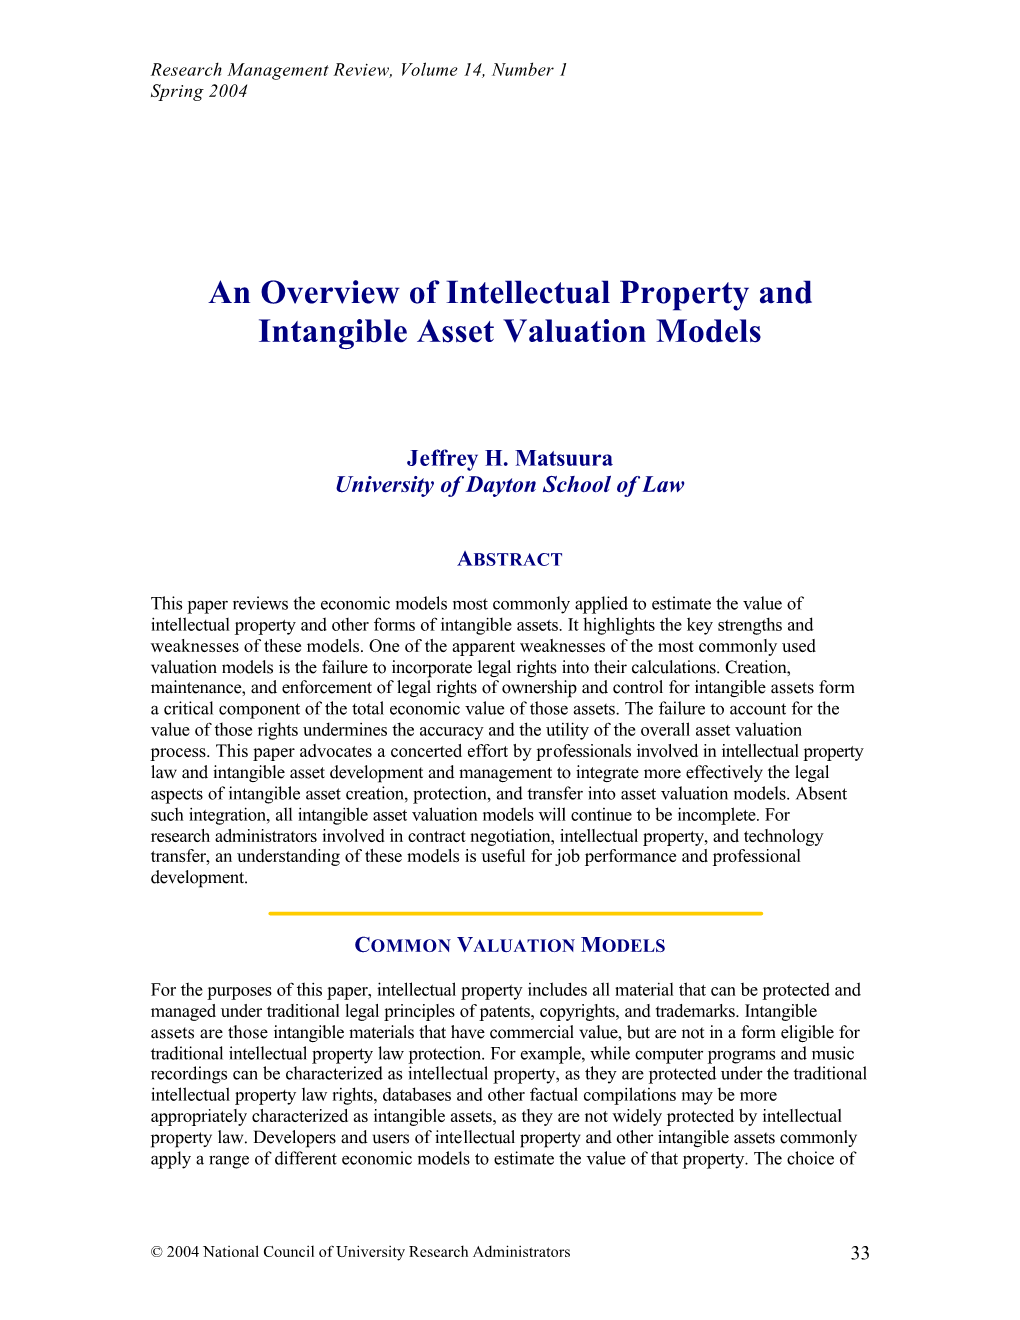 An Overview of Intellectual Property and Intangible Asset Valuation Models